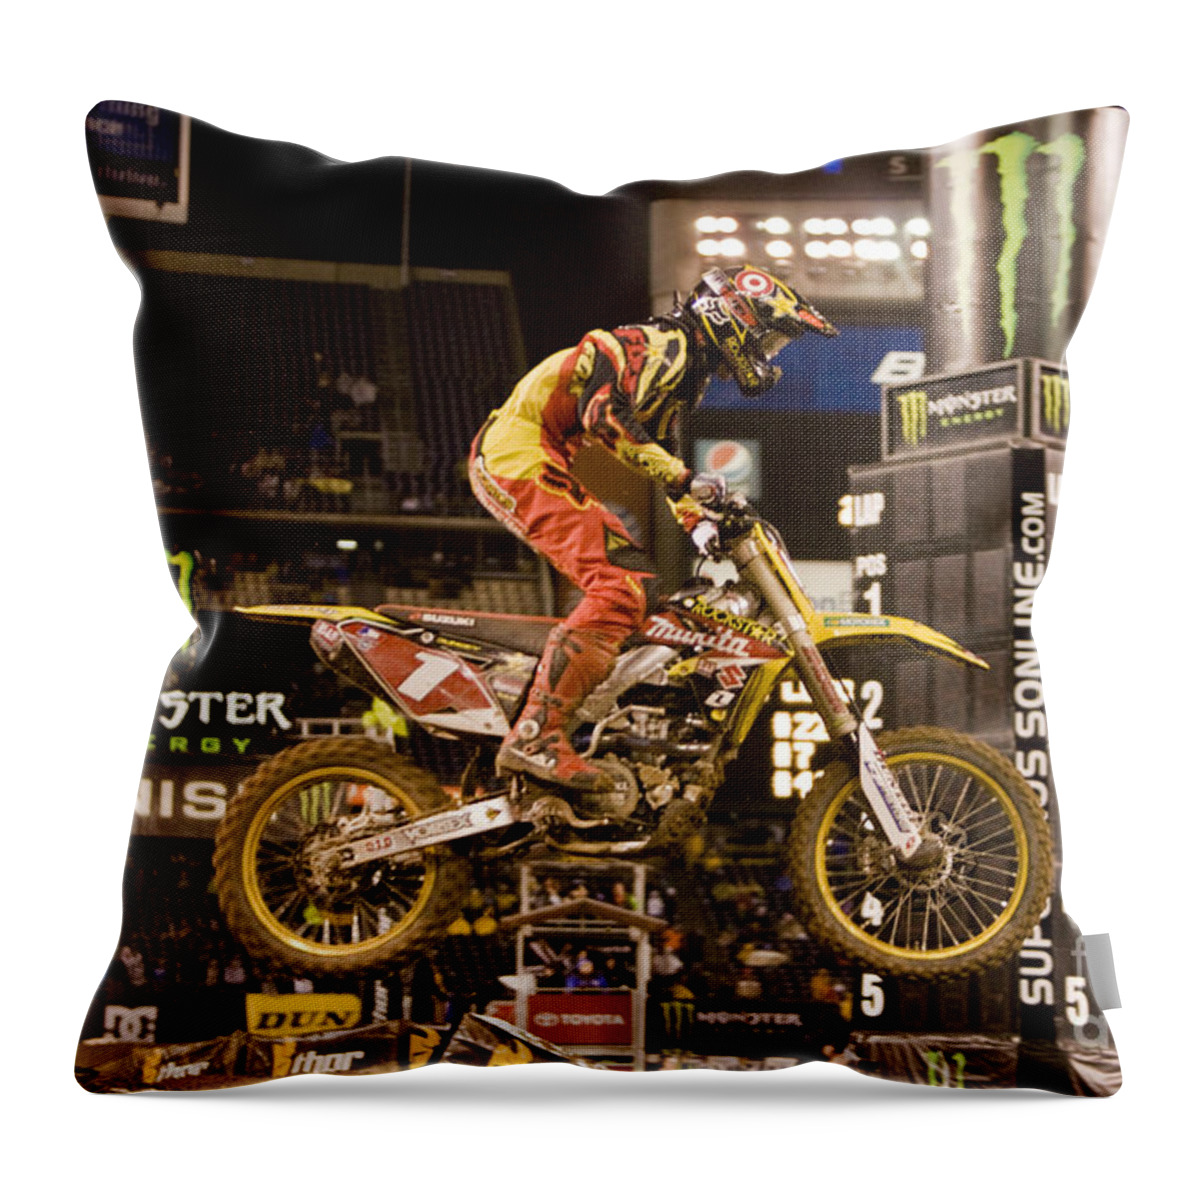 Ama Supercross Throw Pillow featuring the photograph 9272 by Daniel Knighton